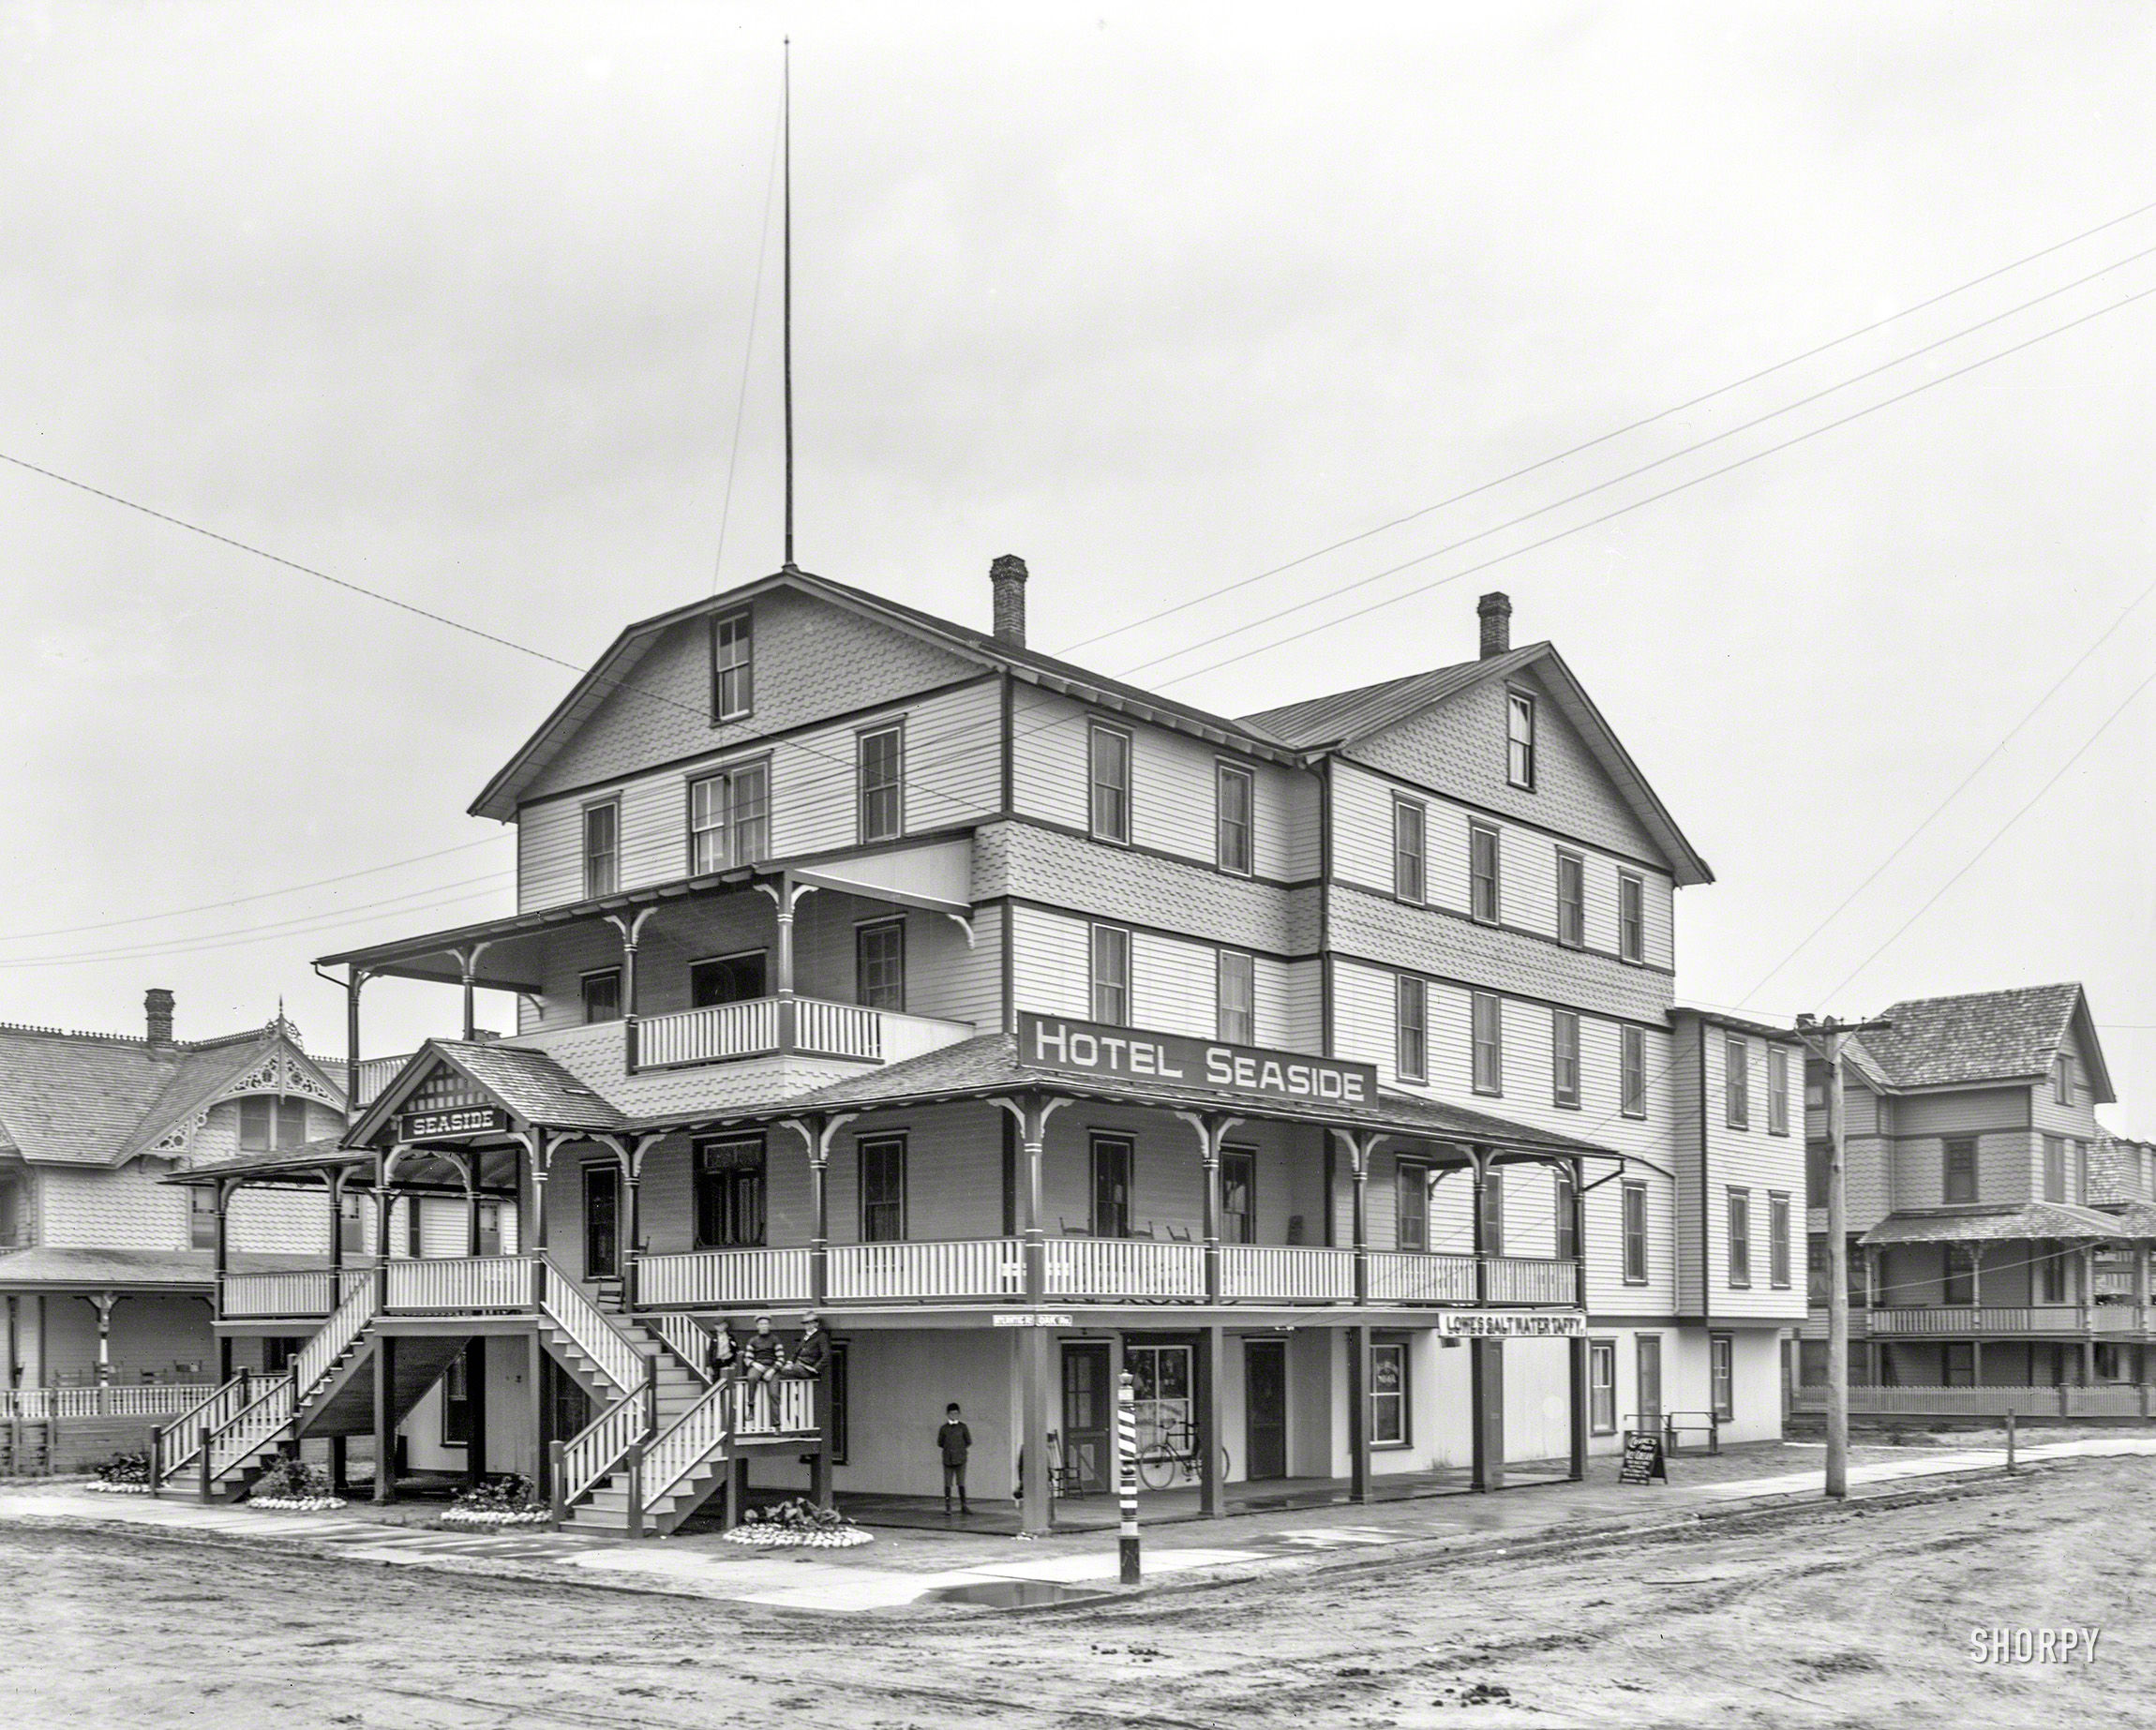 Wildwood, New Jersey, circa 1907. "Hotel Seaside." 8x10 inch dry plate glass negative, Detroit Publishing Company. View full size.